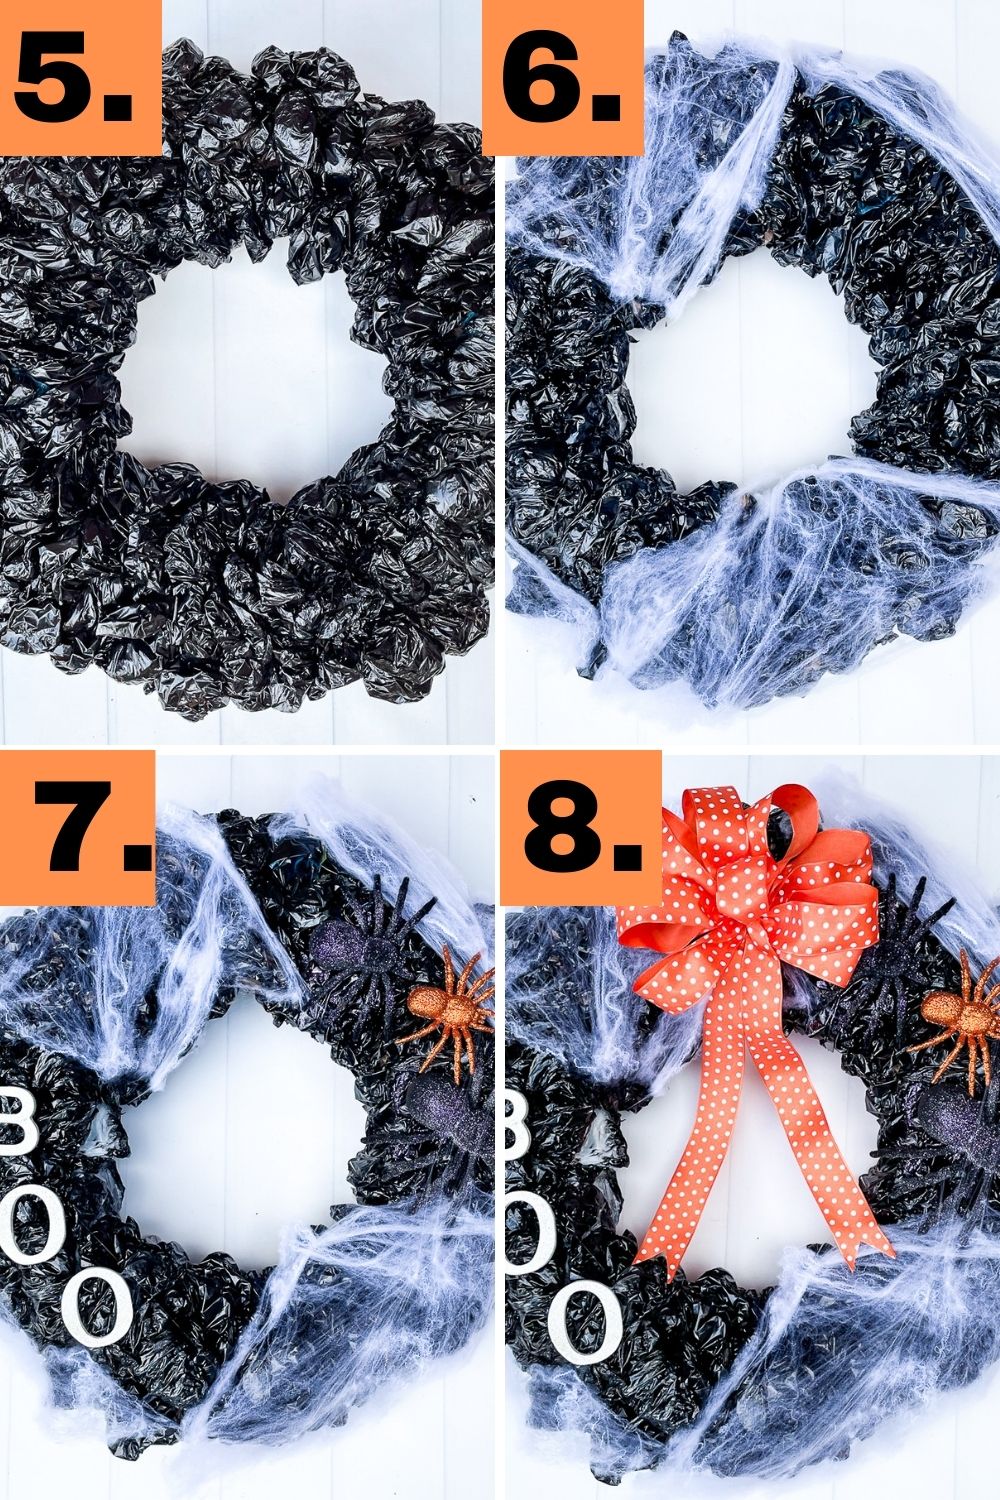 Step-by-step tutorial to make an upcycled plastic bag halloween wreath